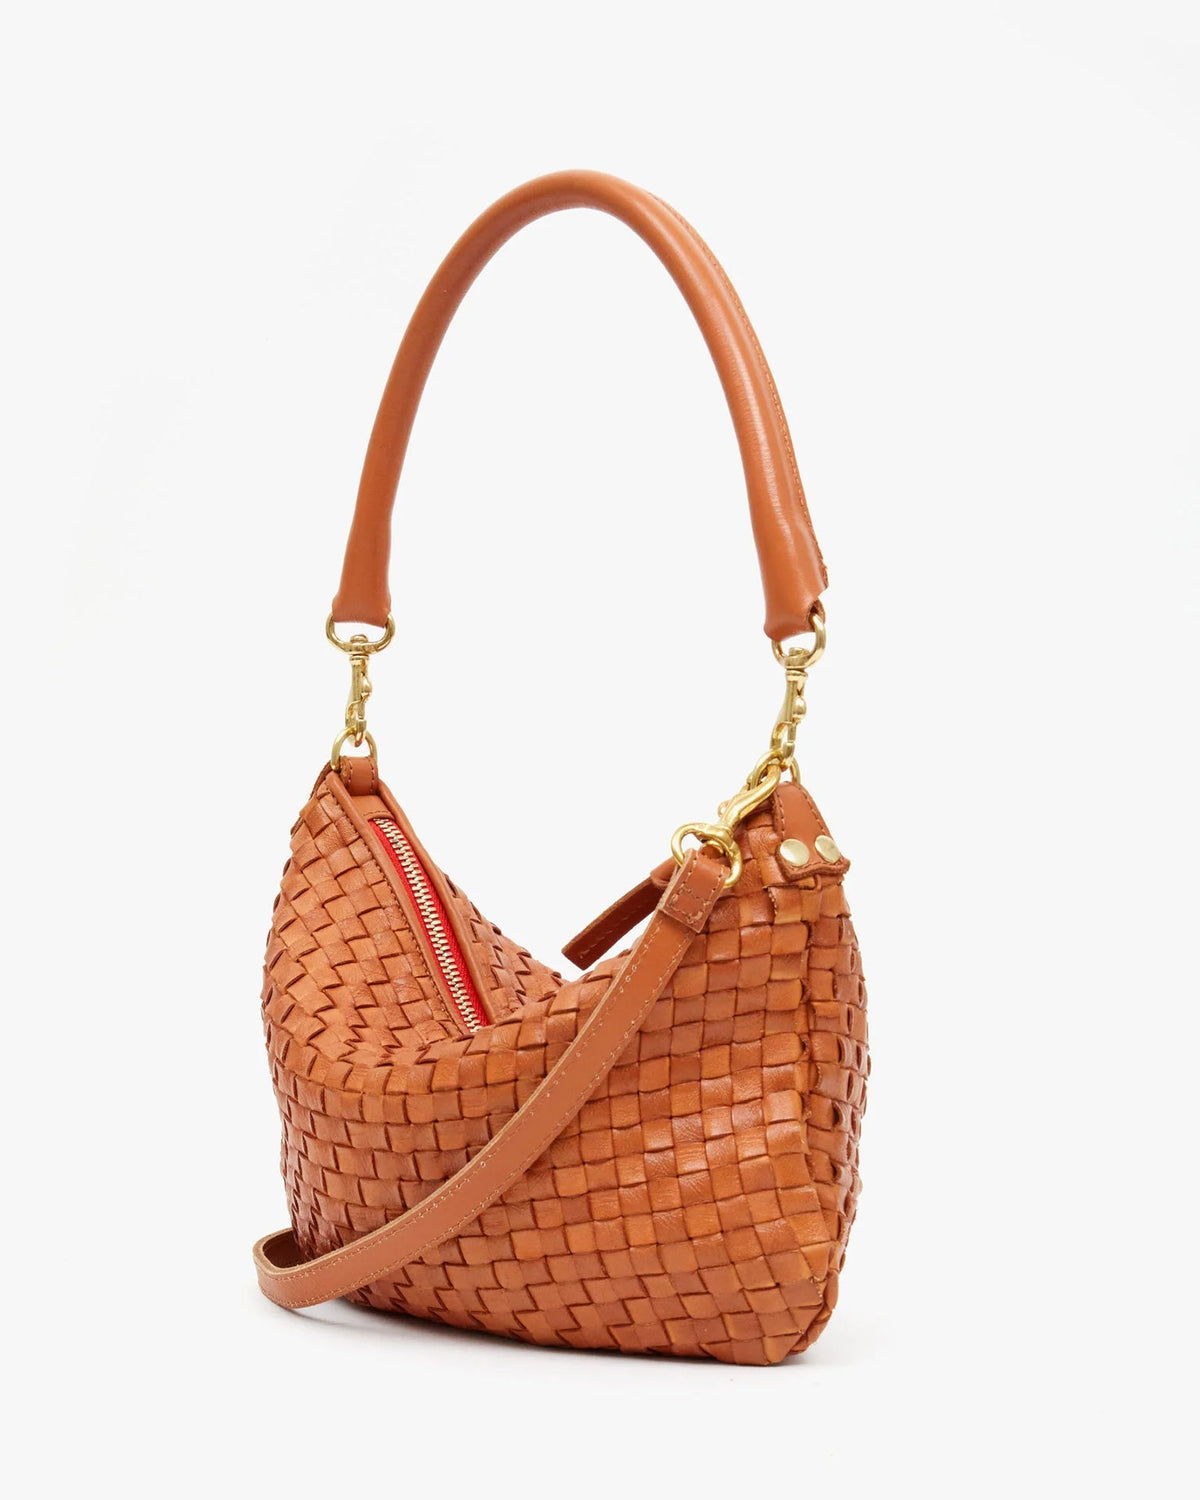 Clare V. Accessories Natural Petit Moyen Messenger in Natural Woven Checker